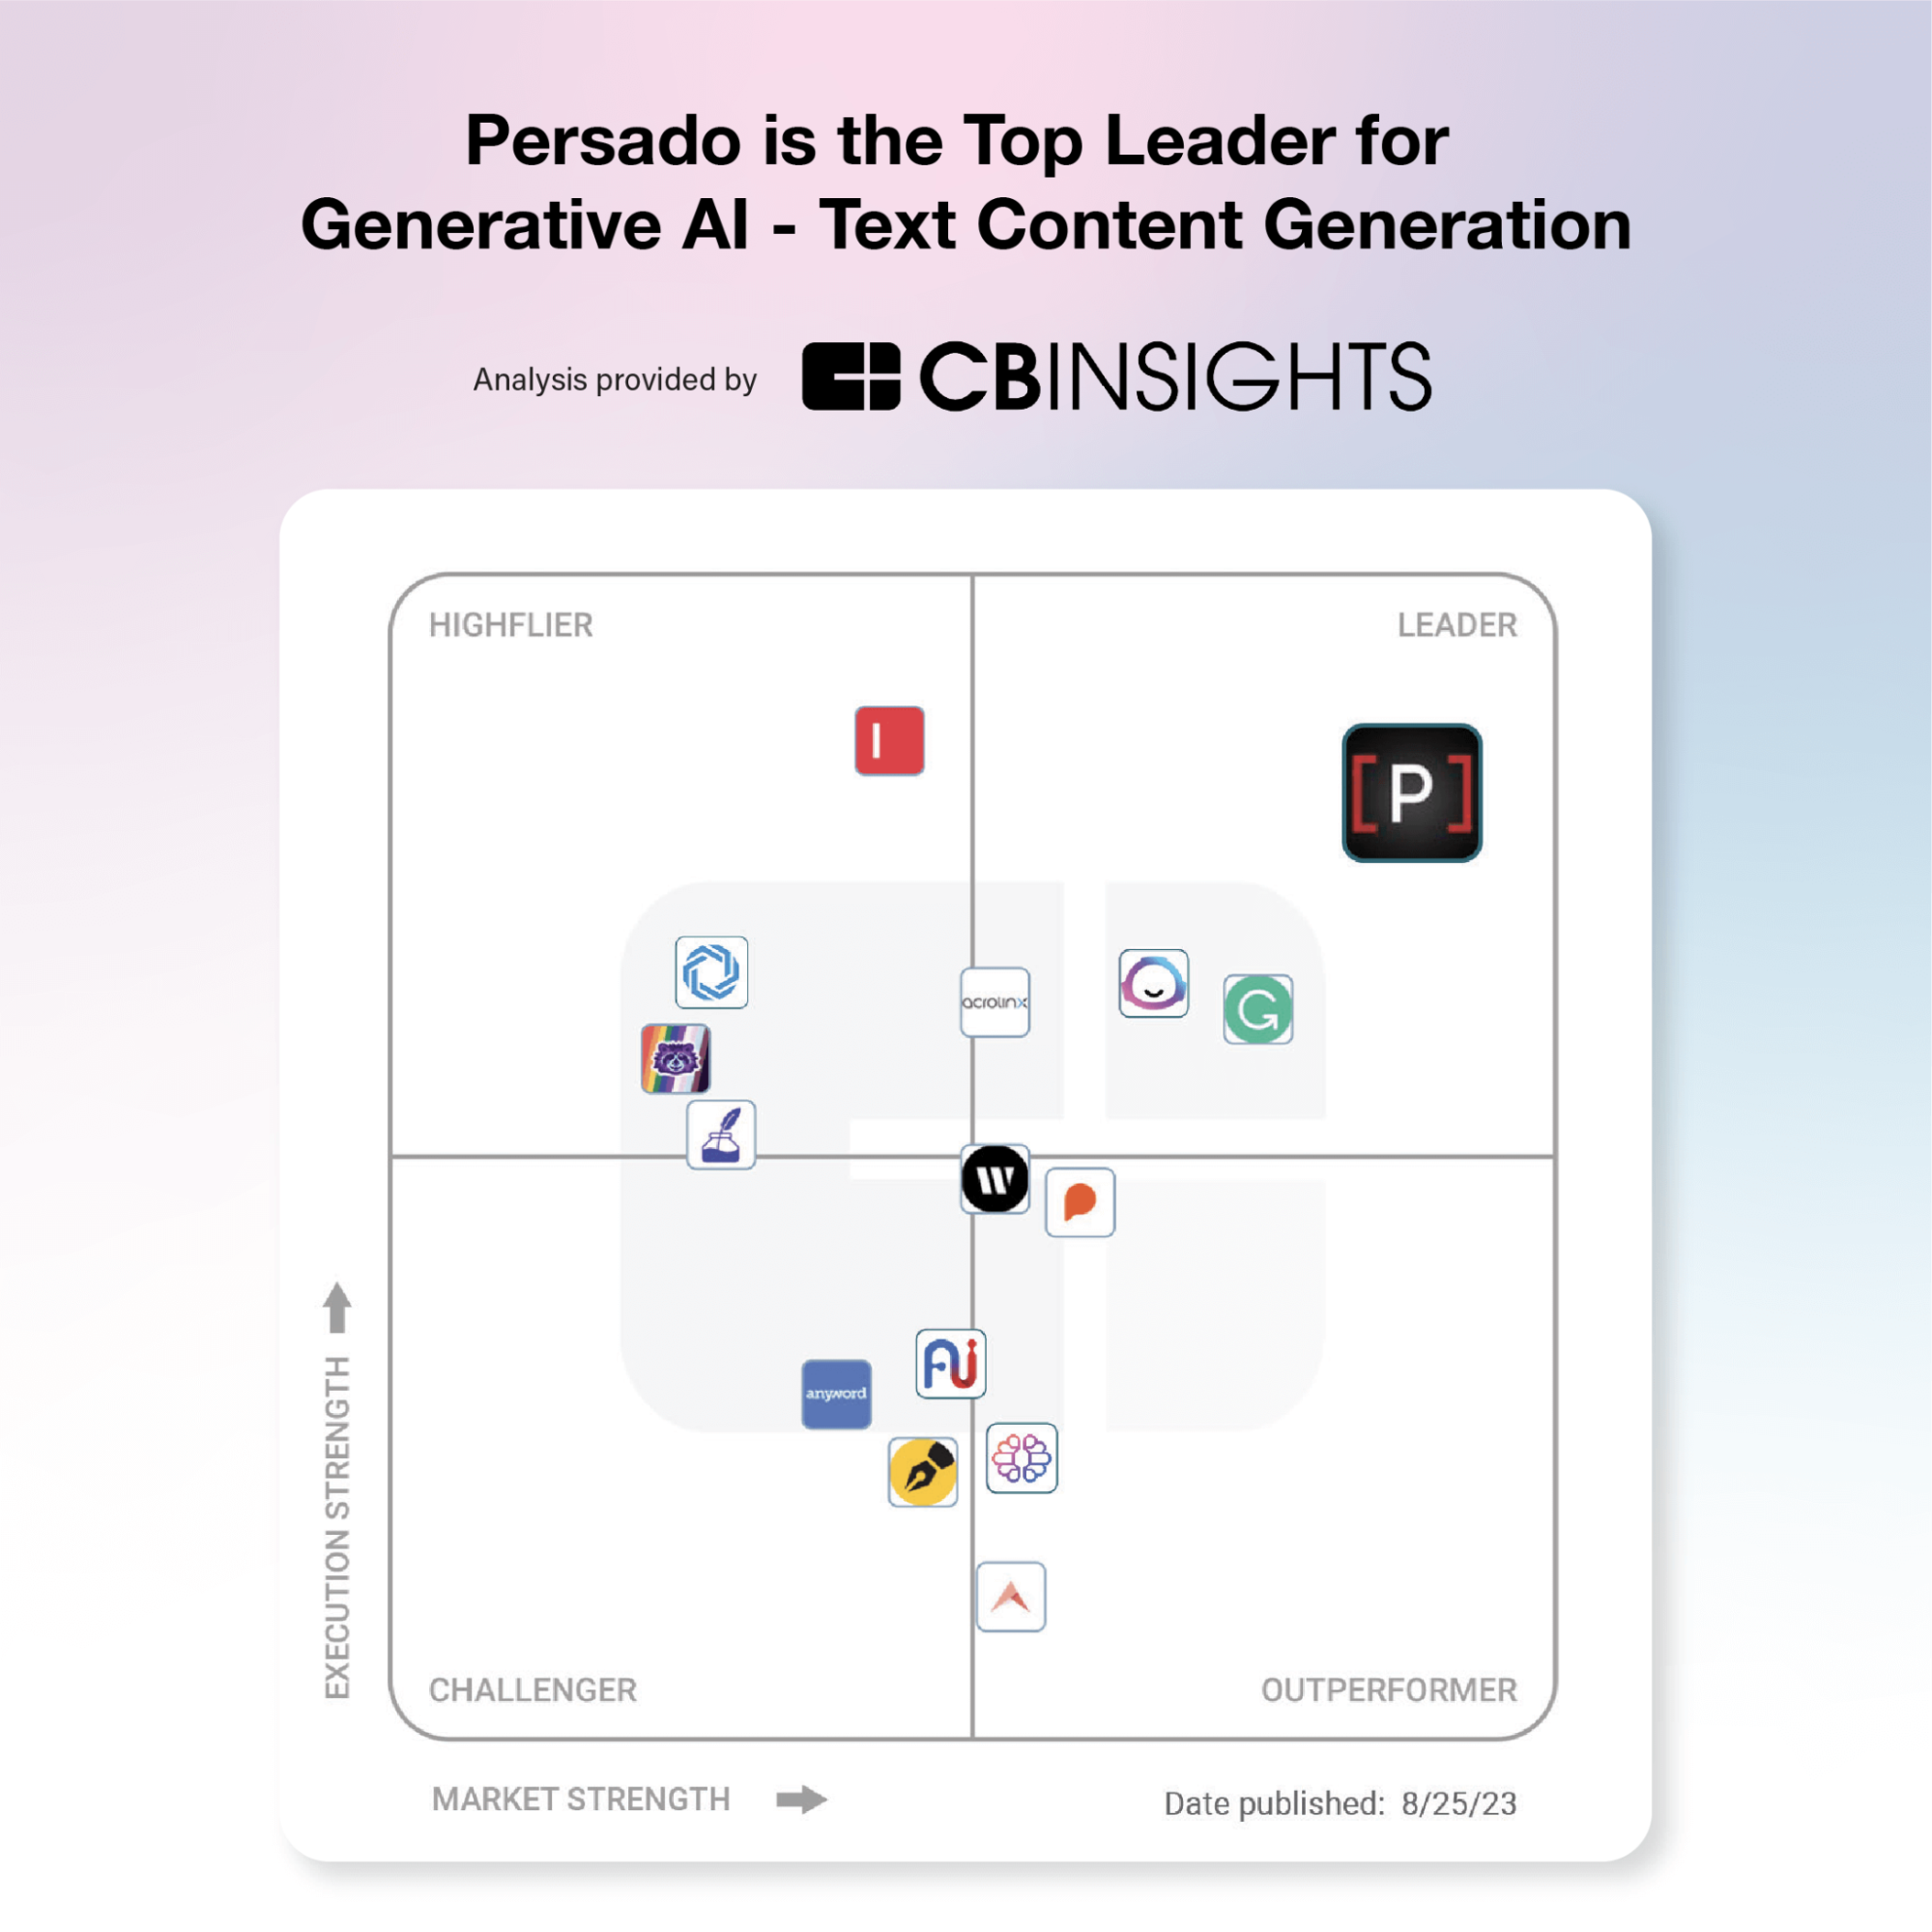 Persado is the top leader for generative AI - text content generation